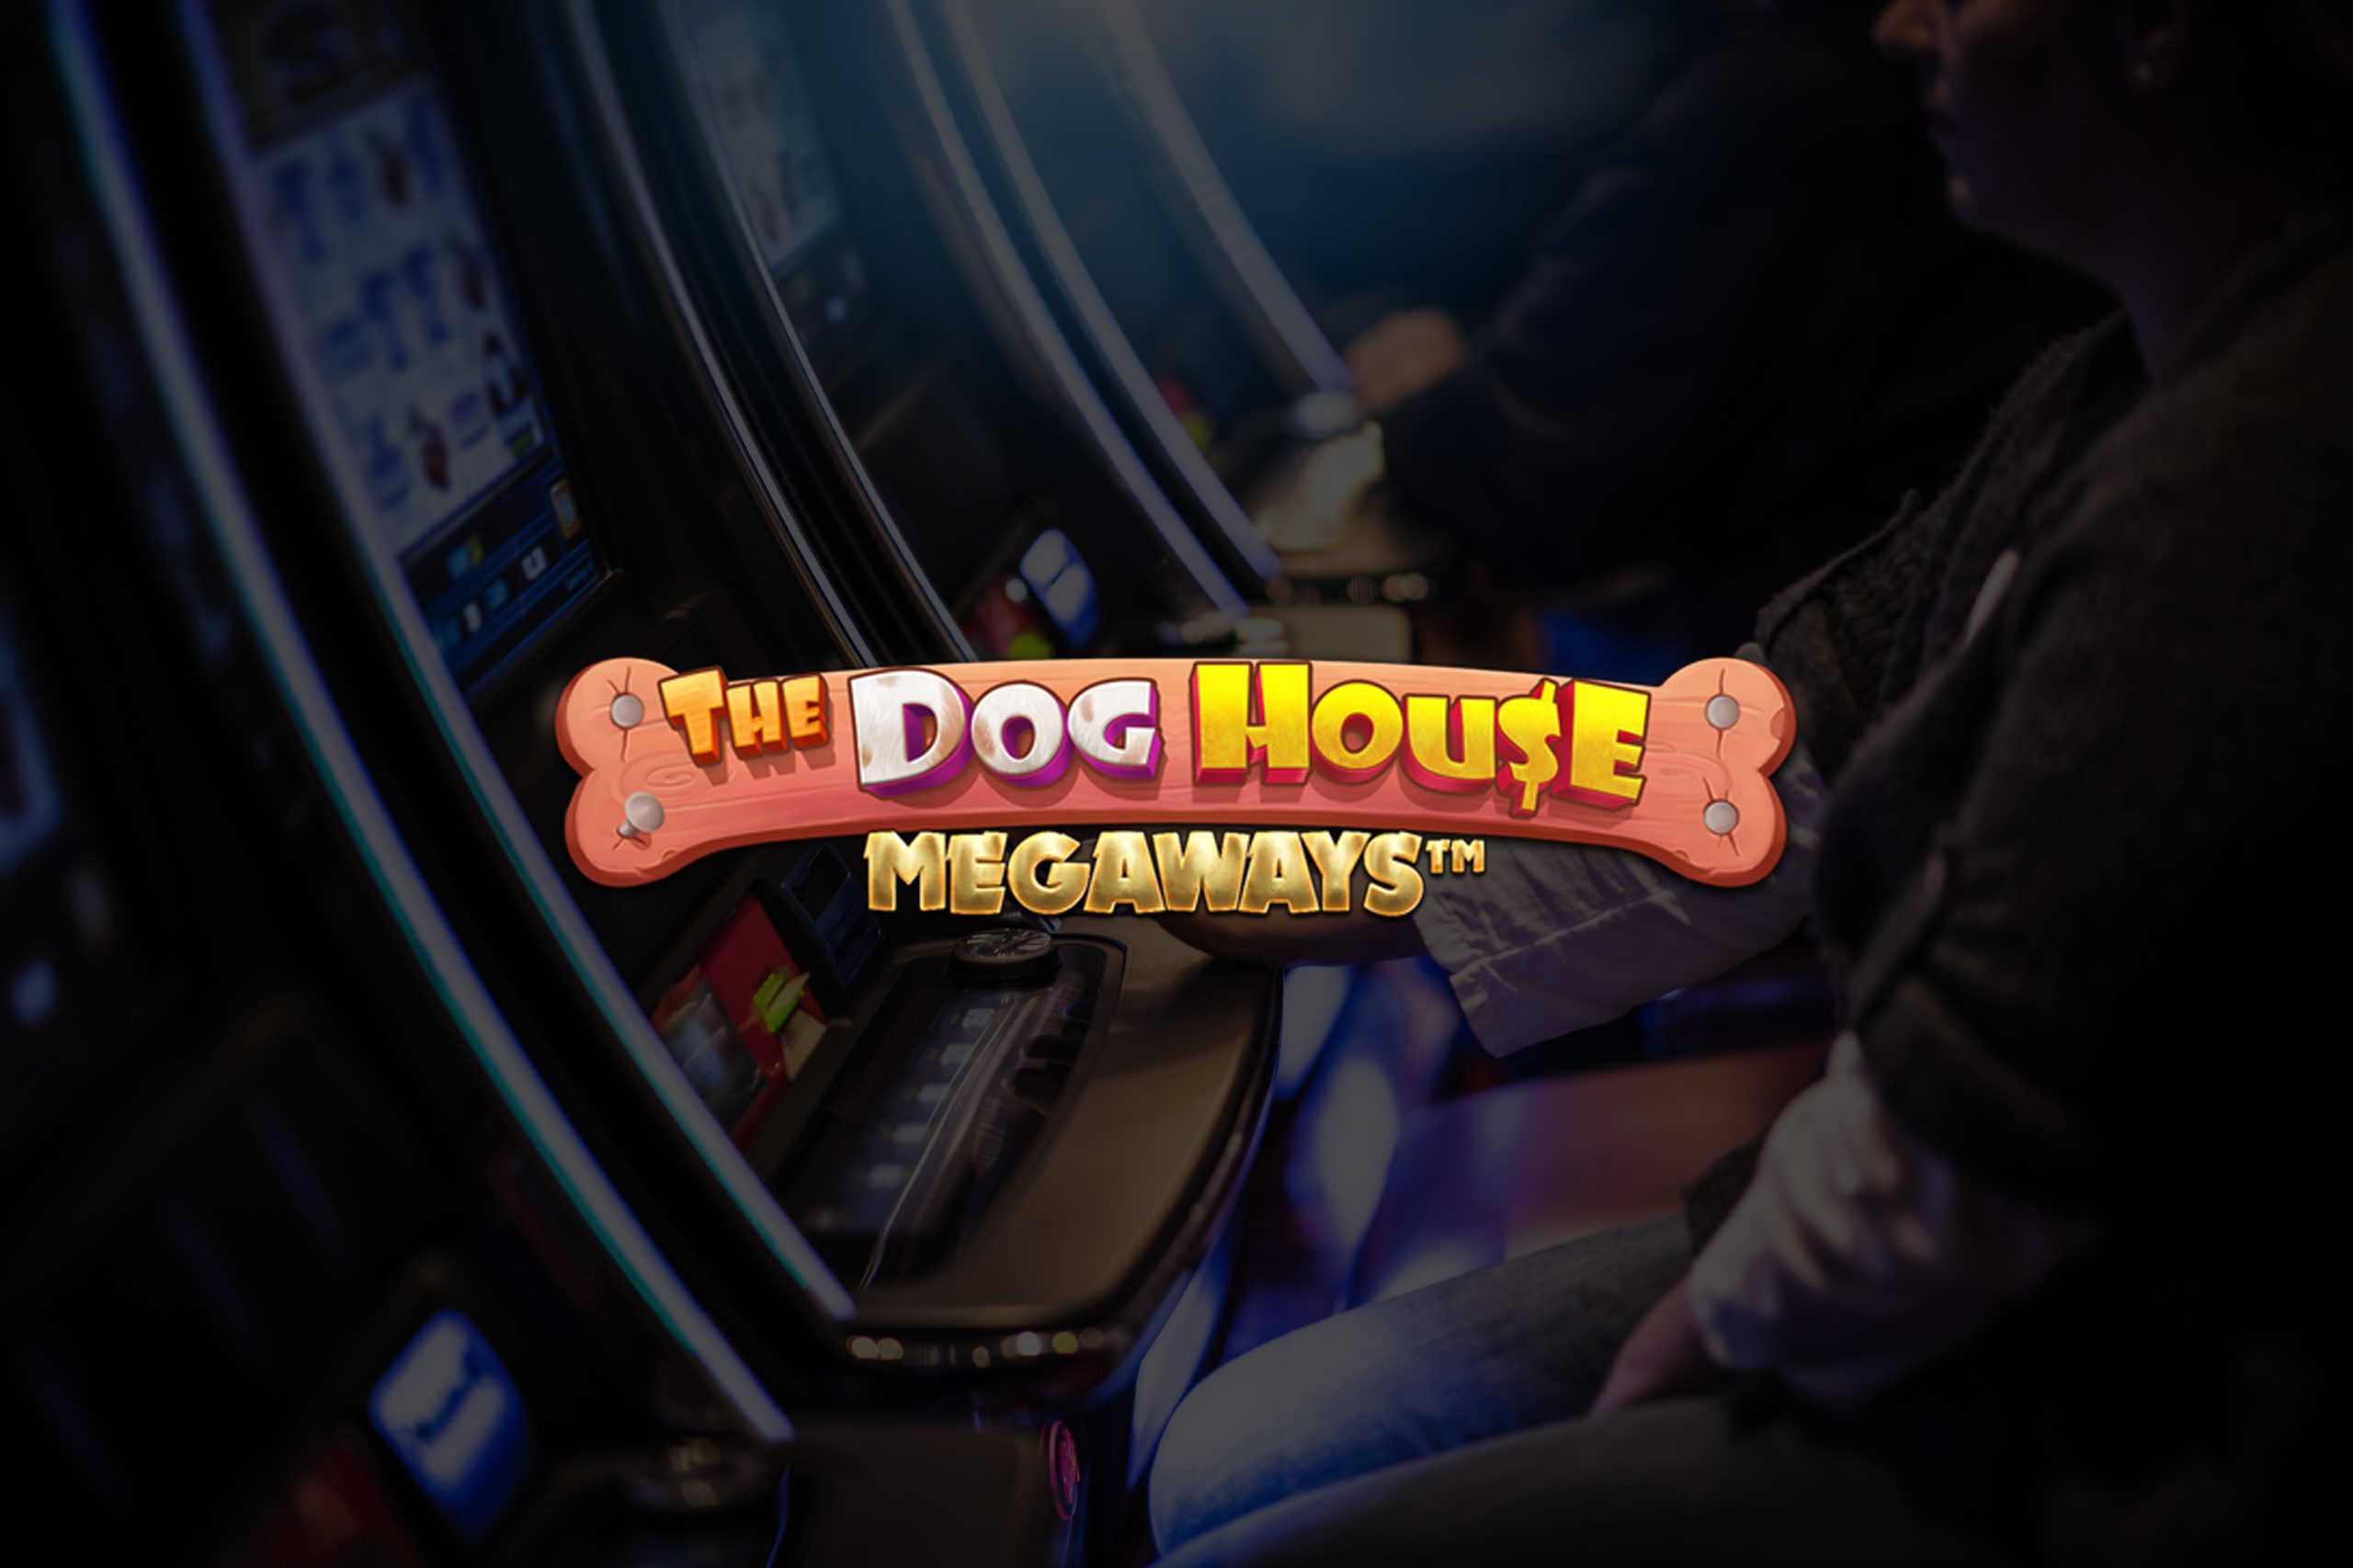 Review On The Dog House Megaways By Pragmatic Play: Not On Gamstop